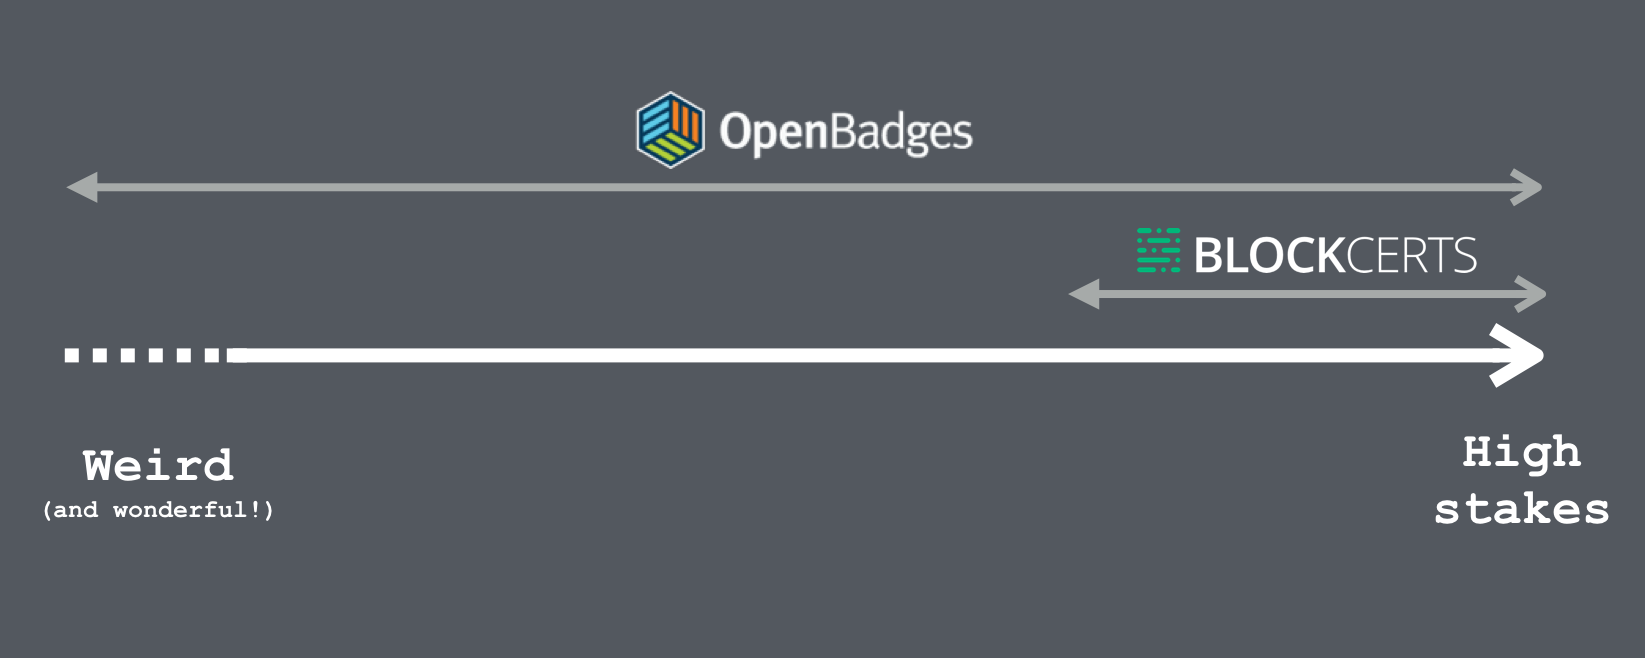 Open Badges, BlockCerts, and high-stakes credentialing